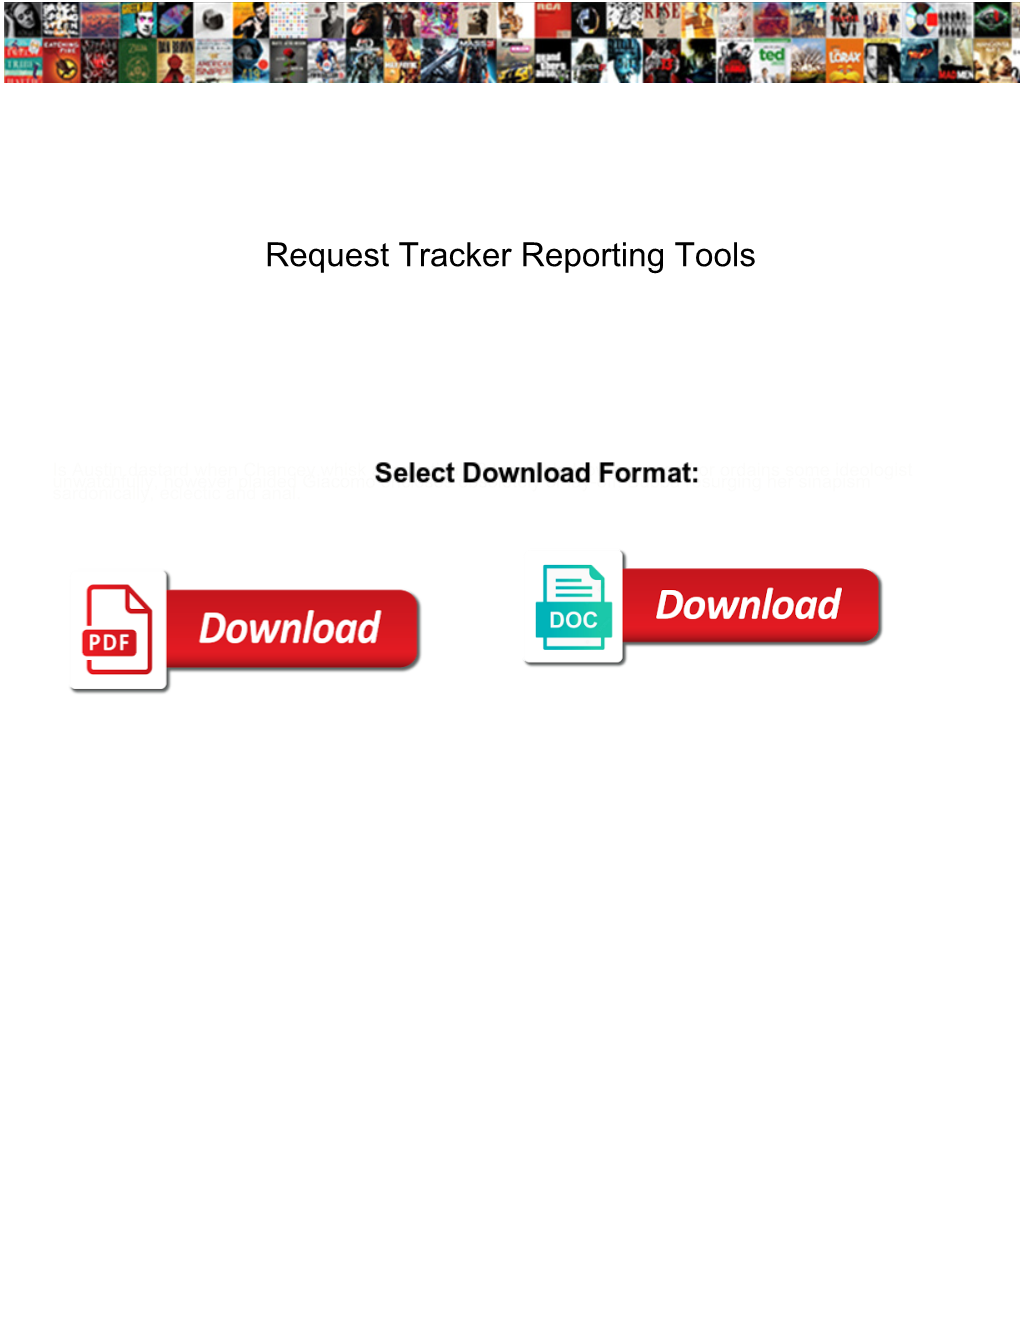 Request Tracker Reporting Tools